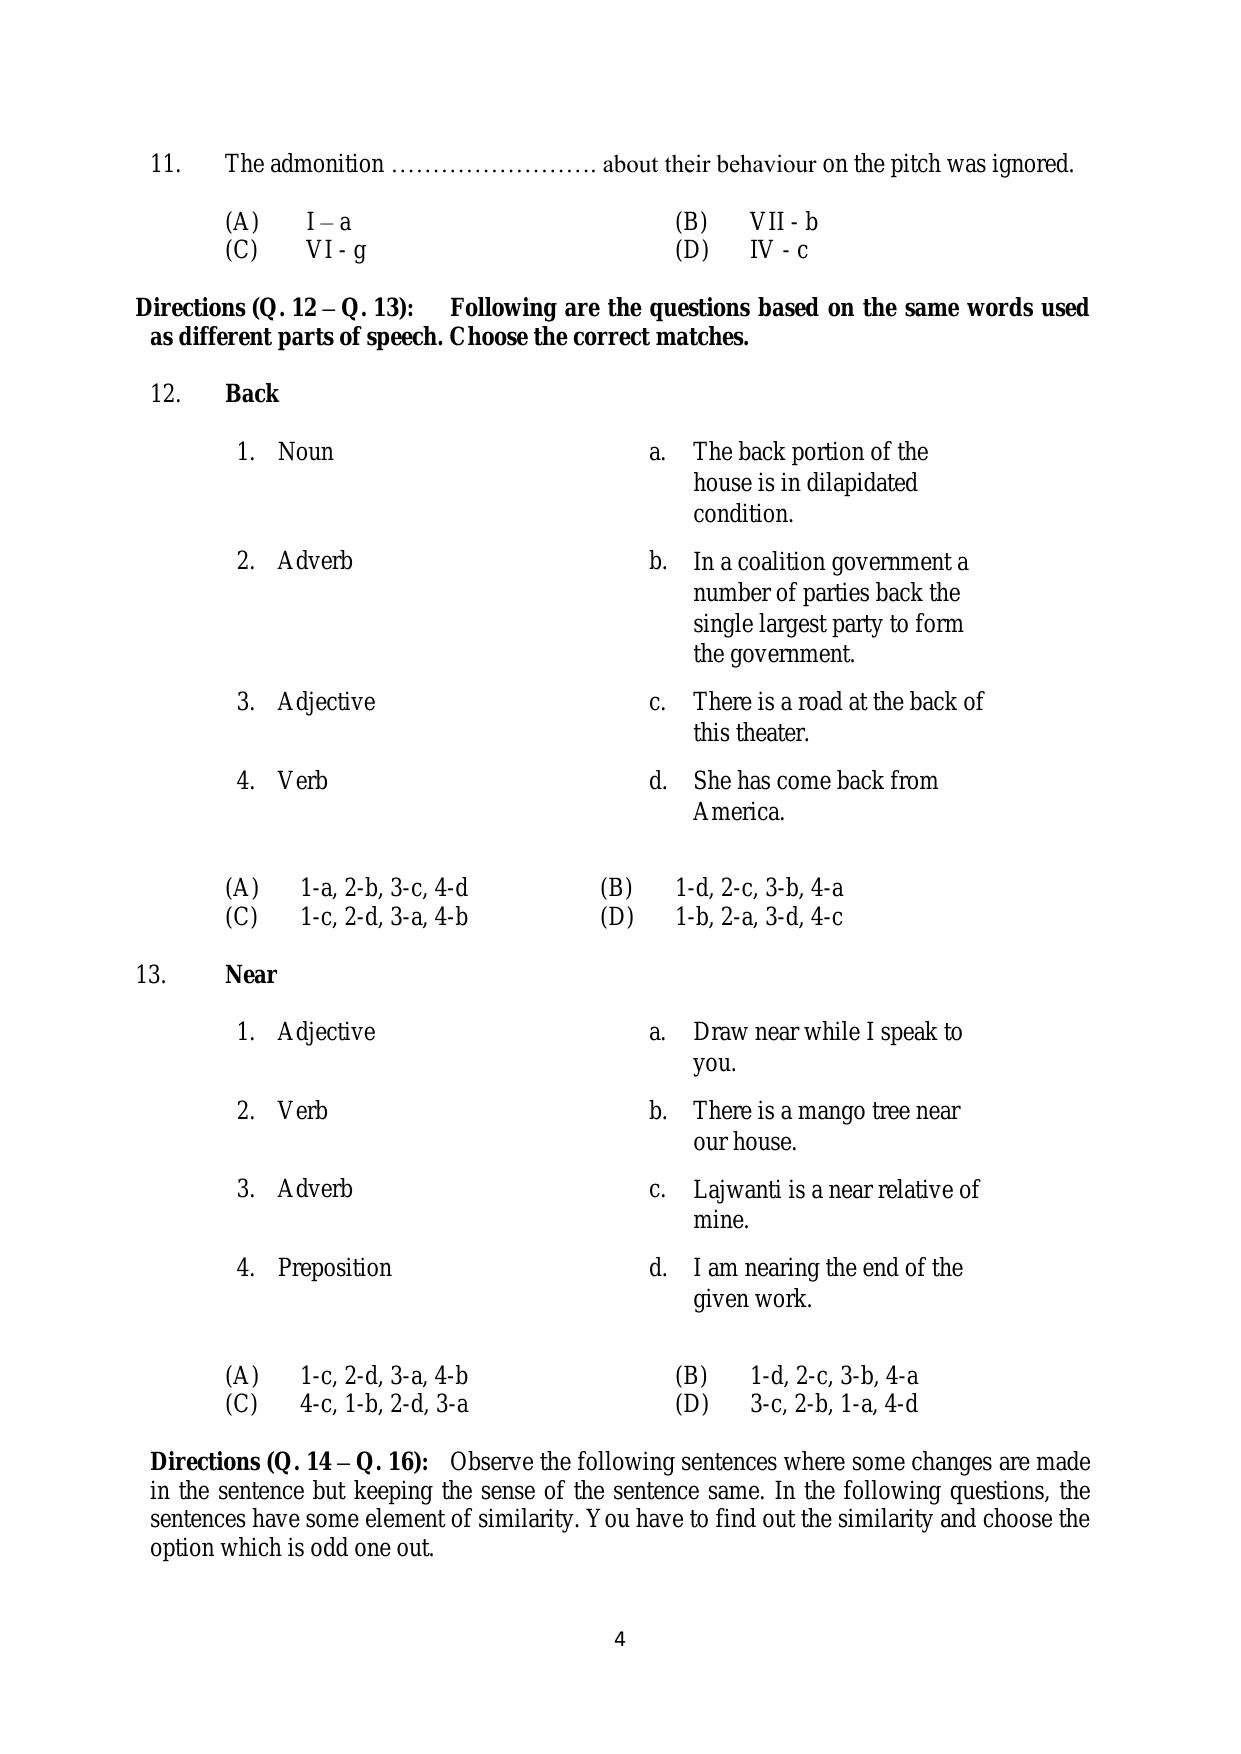 AILET 2020 Question Paper for BA LLB - Page 4